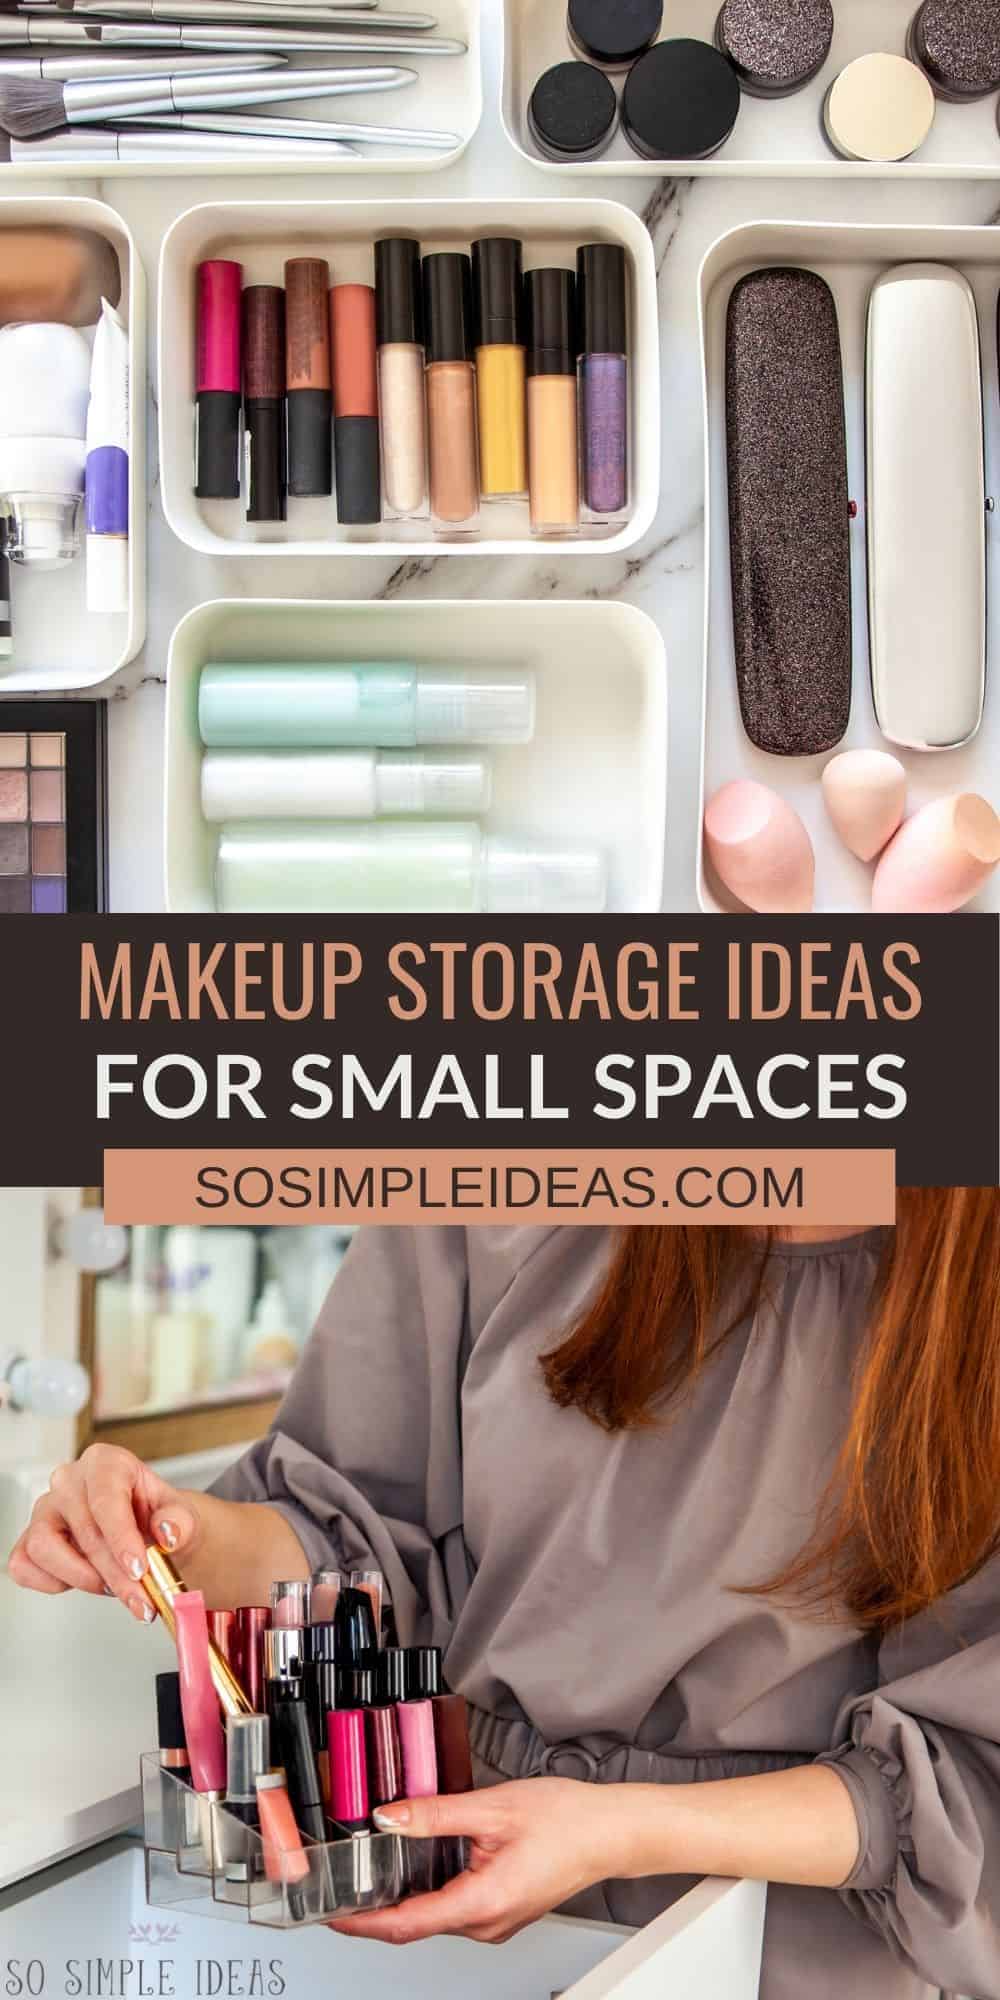 makeup storage ideas for small spaces pinterest image.